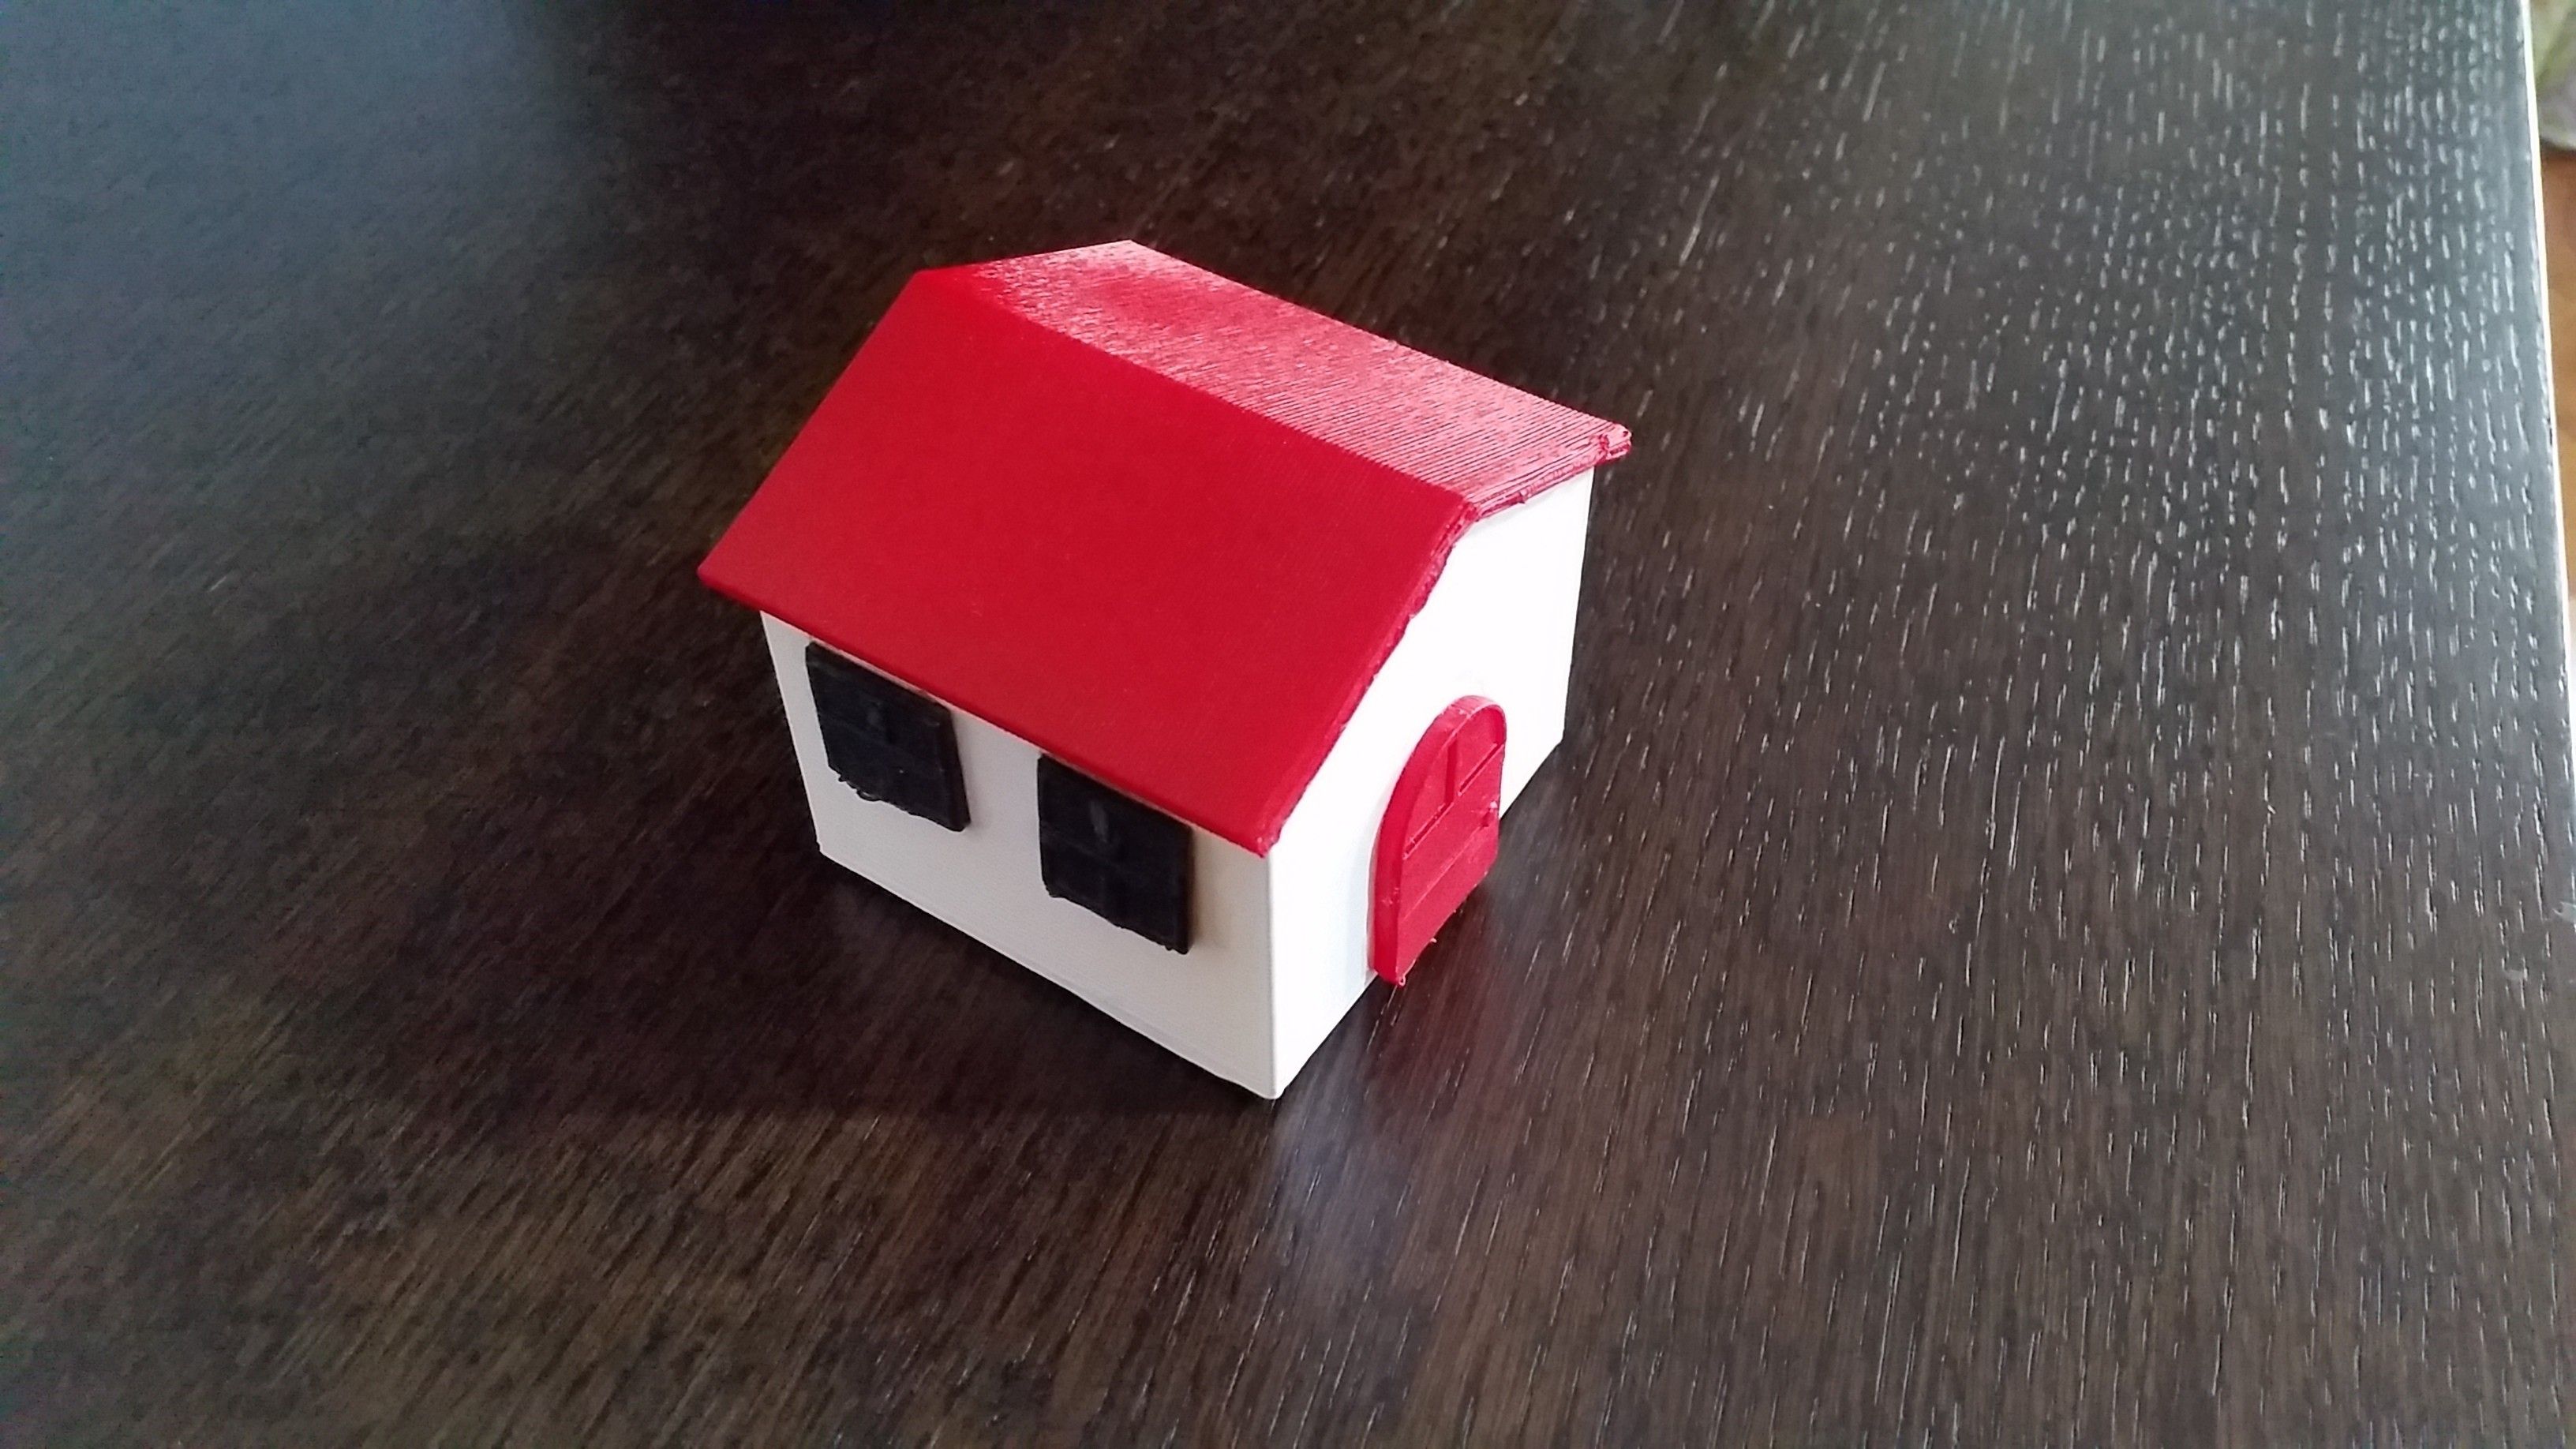 20170211_132007.jpg Download STL file Small house • 3D printable template, Arge89